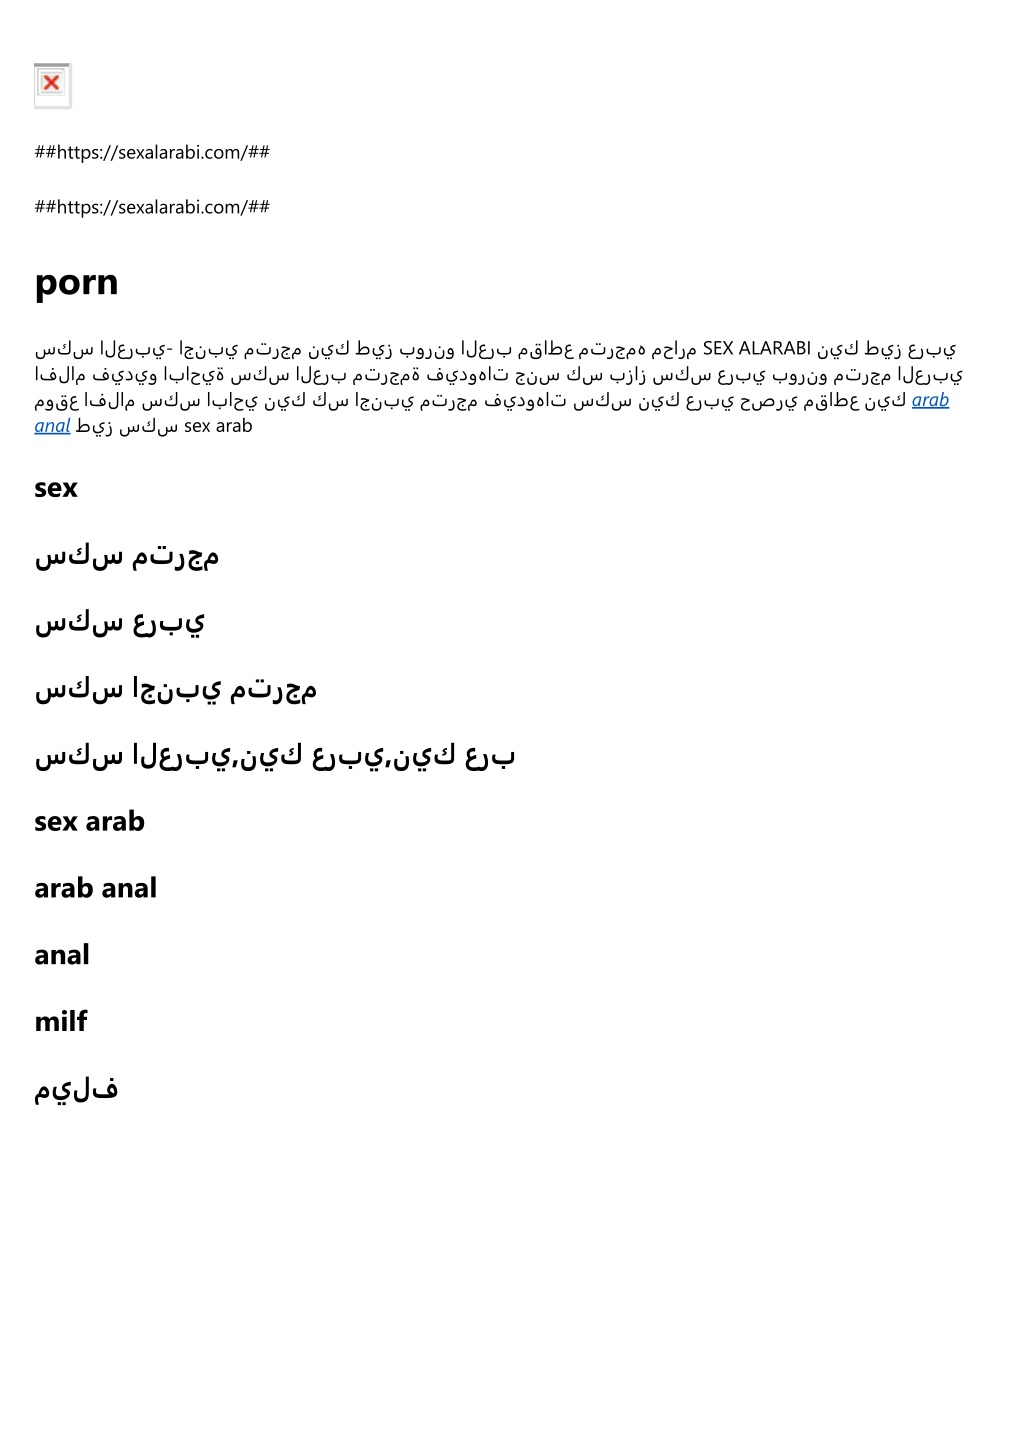 Ppt Arab Anal Powerpoint Presentation Free Download Id 12018449